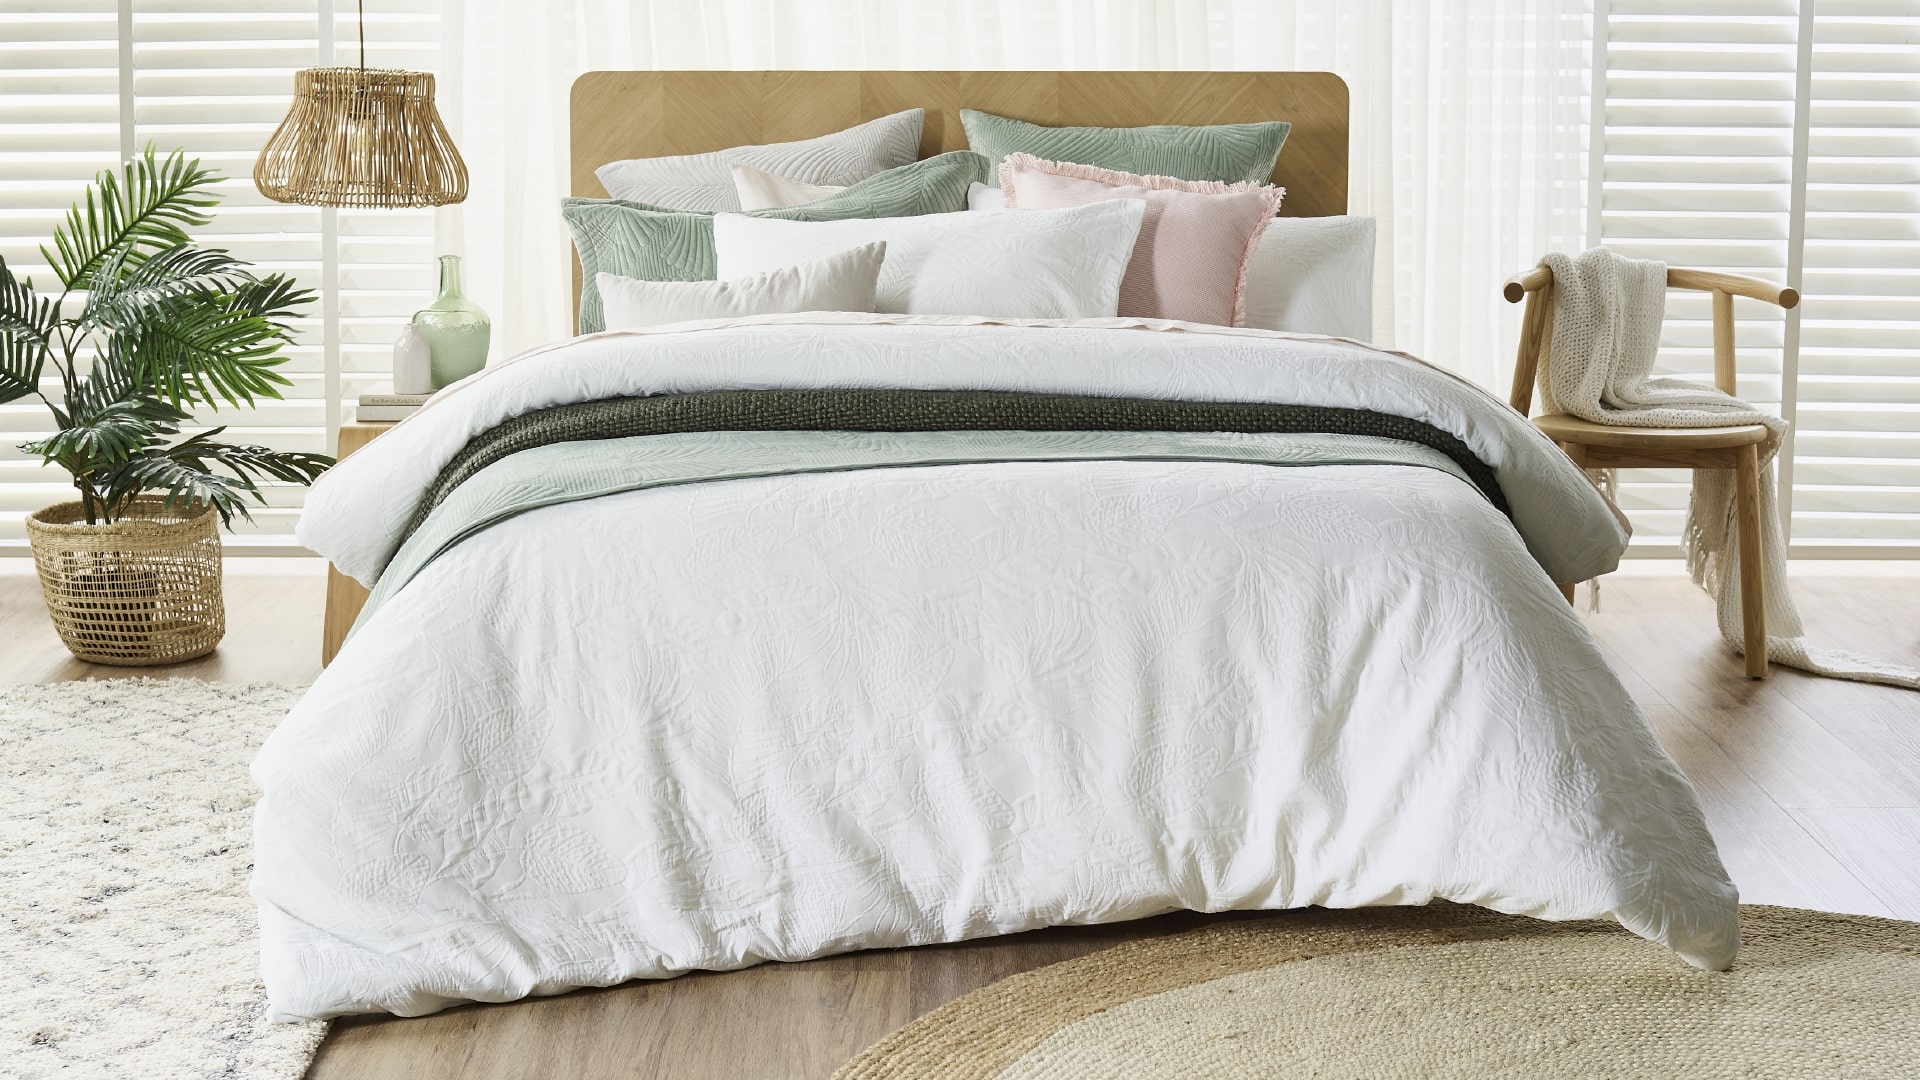 How Should I Wash And Care For My Doona, Pillows And Bed Linen?